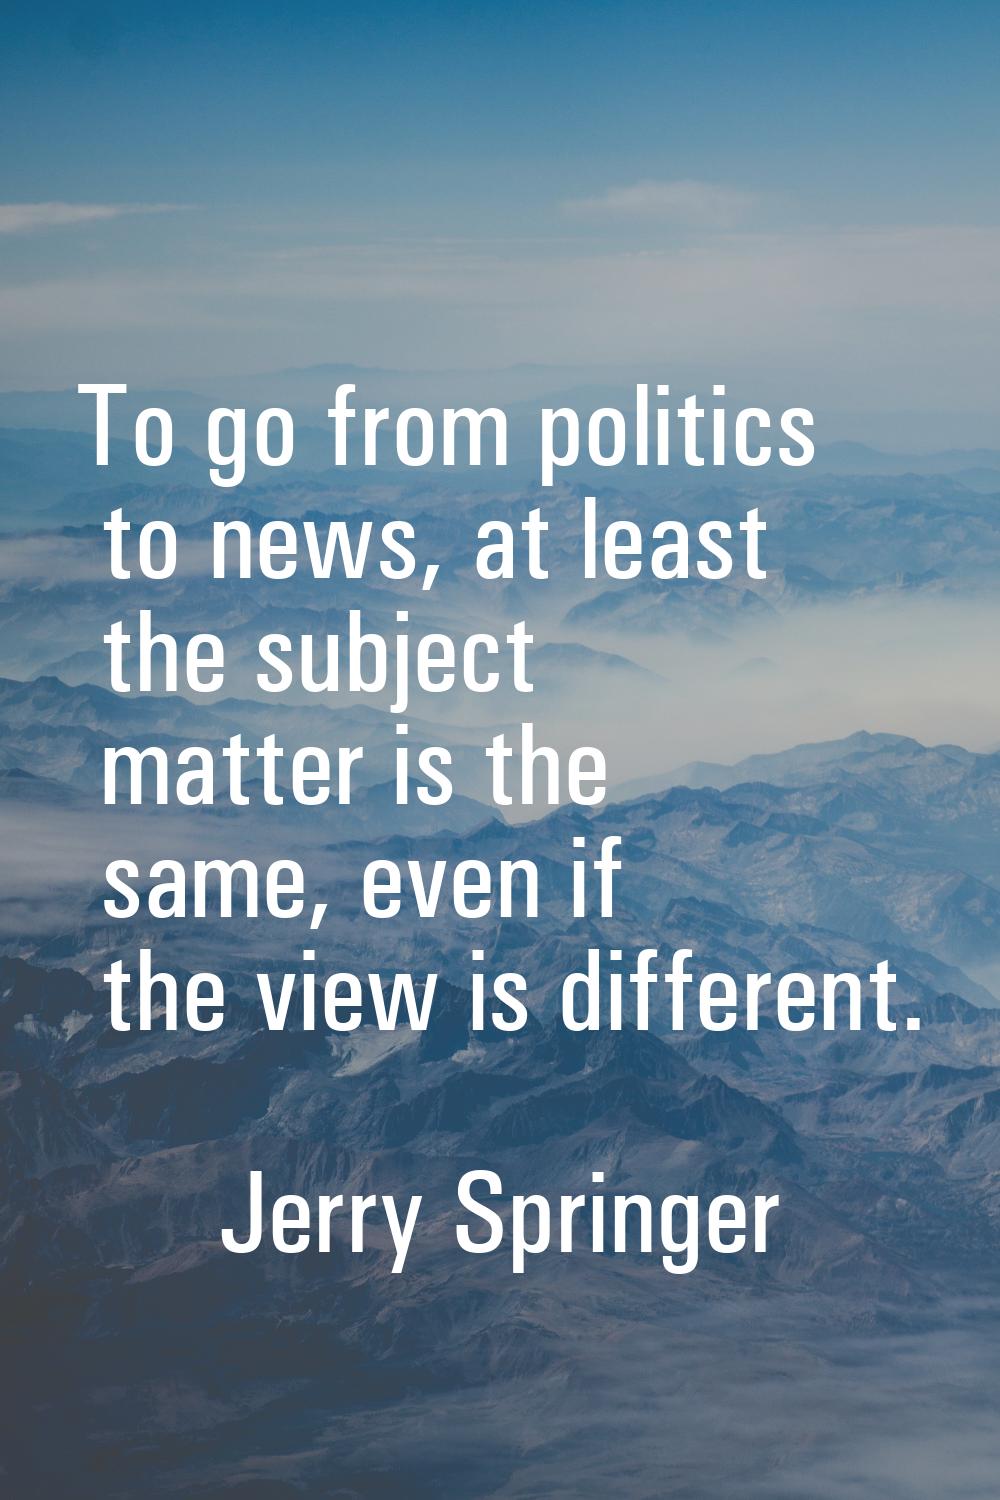 To go from politics to news, at least the subject matter is the same, even if the view is different